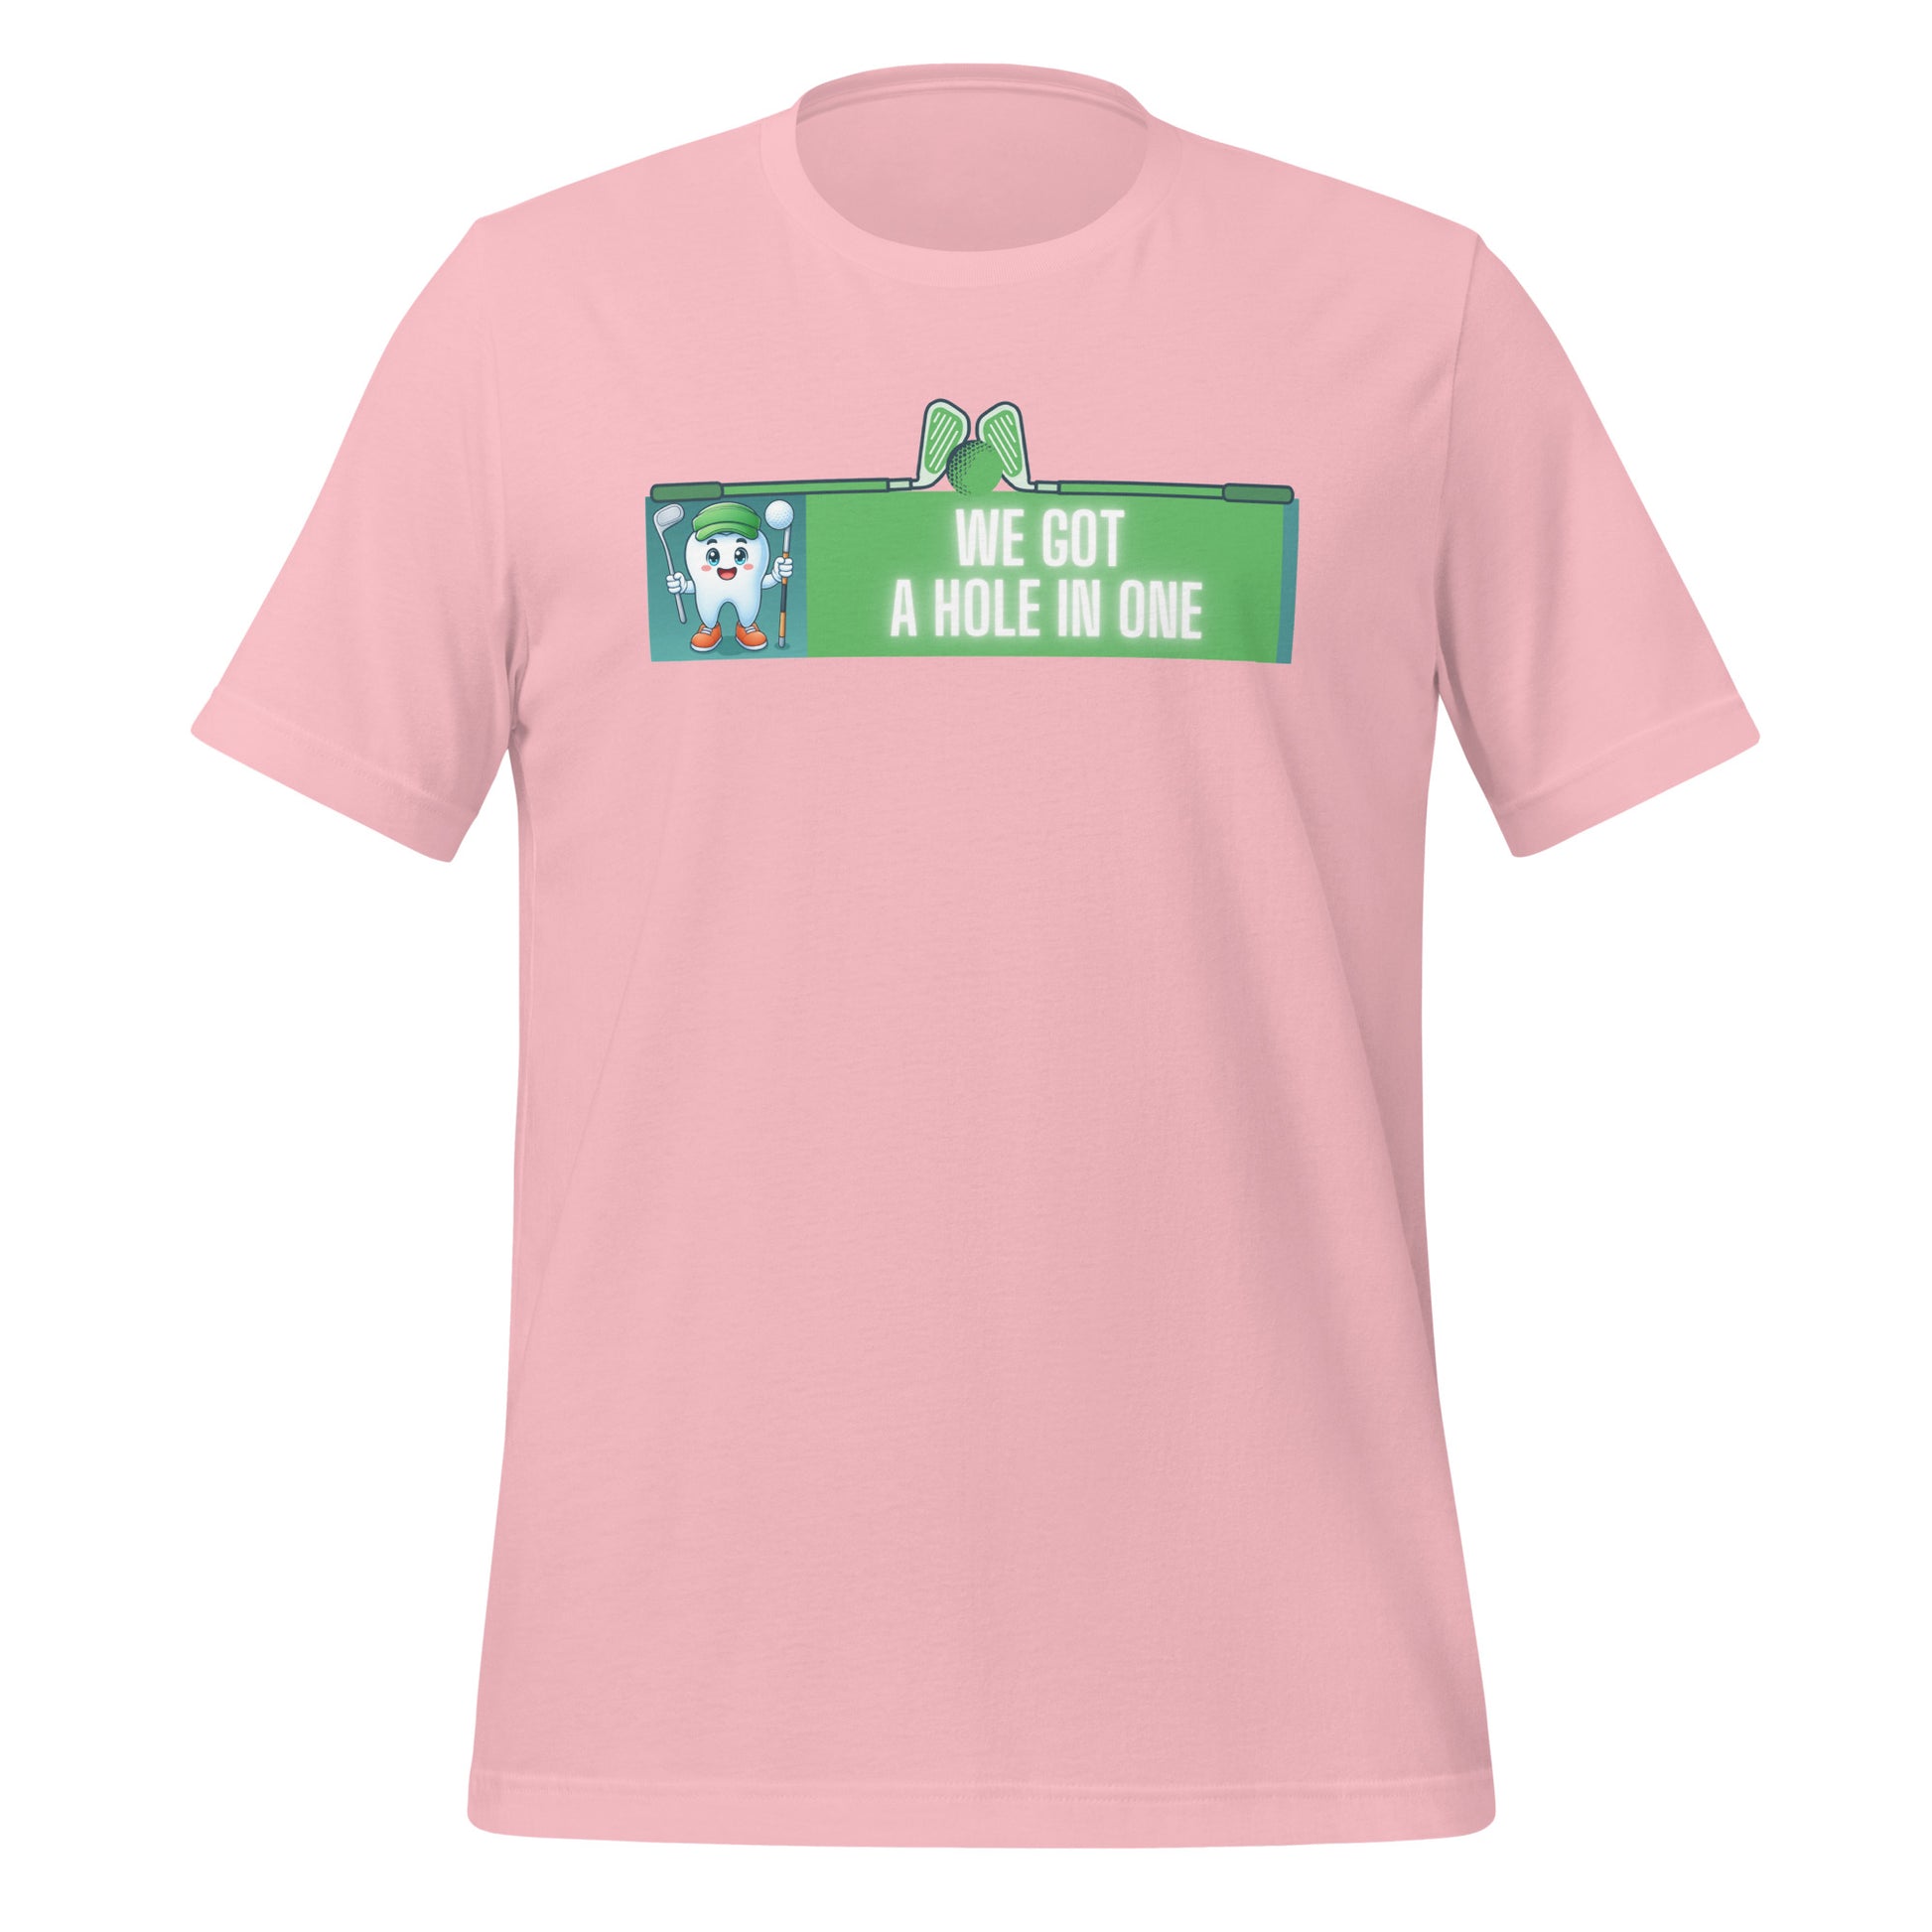 Cute dentist t-shirt showcasing an adorable tooth character in golf attire, joyfully celebrating a ‘hole in one’ achievement, perfect for dentist and dental professionals seeking unique and thematic dental apparel. Pink color, front view.